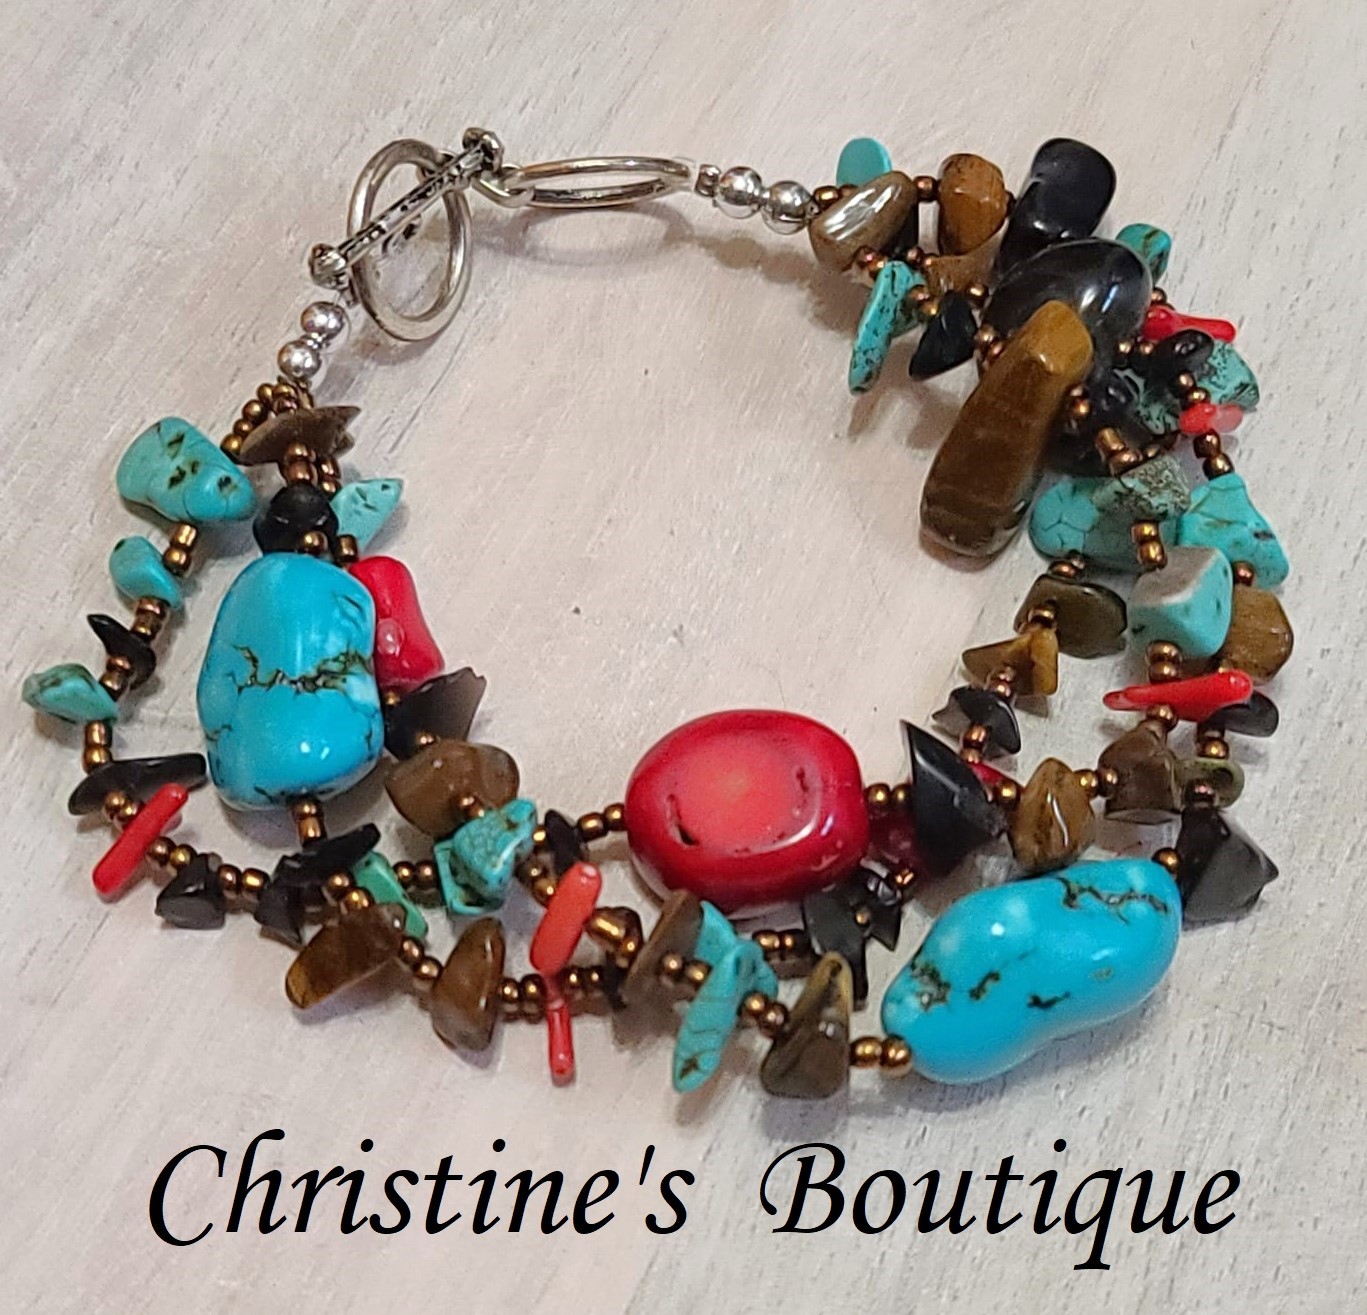 Gemstone nugget bracelet with 3 rows, dyed coral, turquoise, howlite, tiger eye